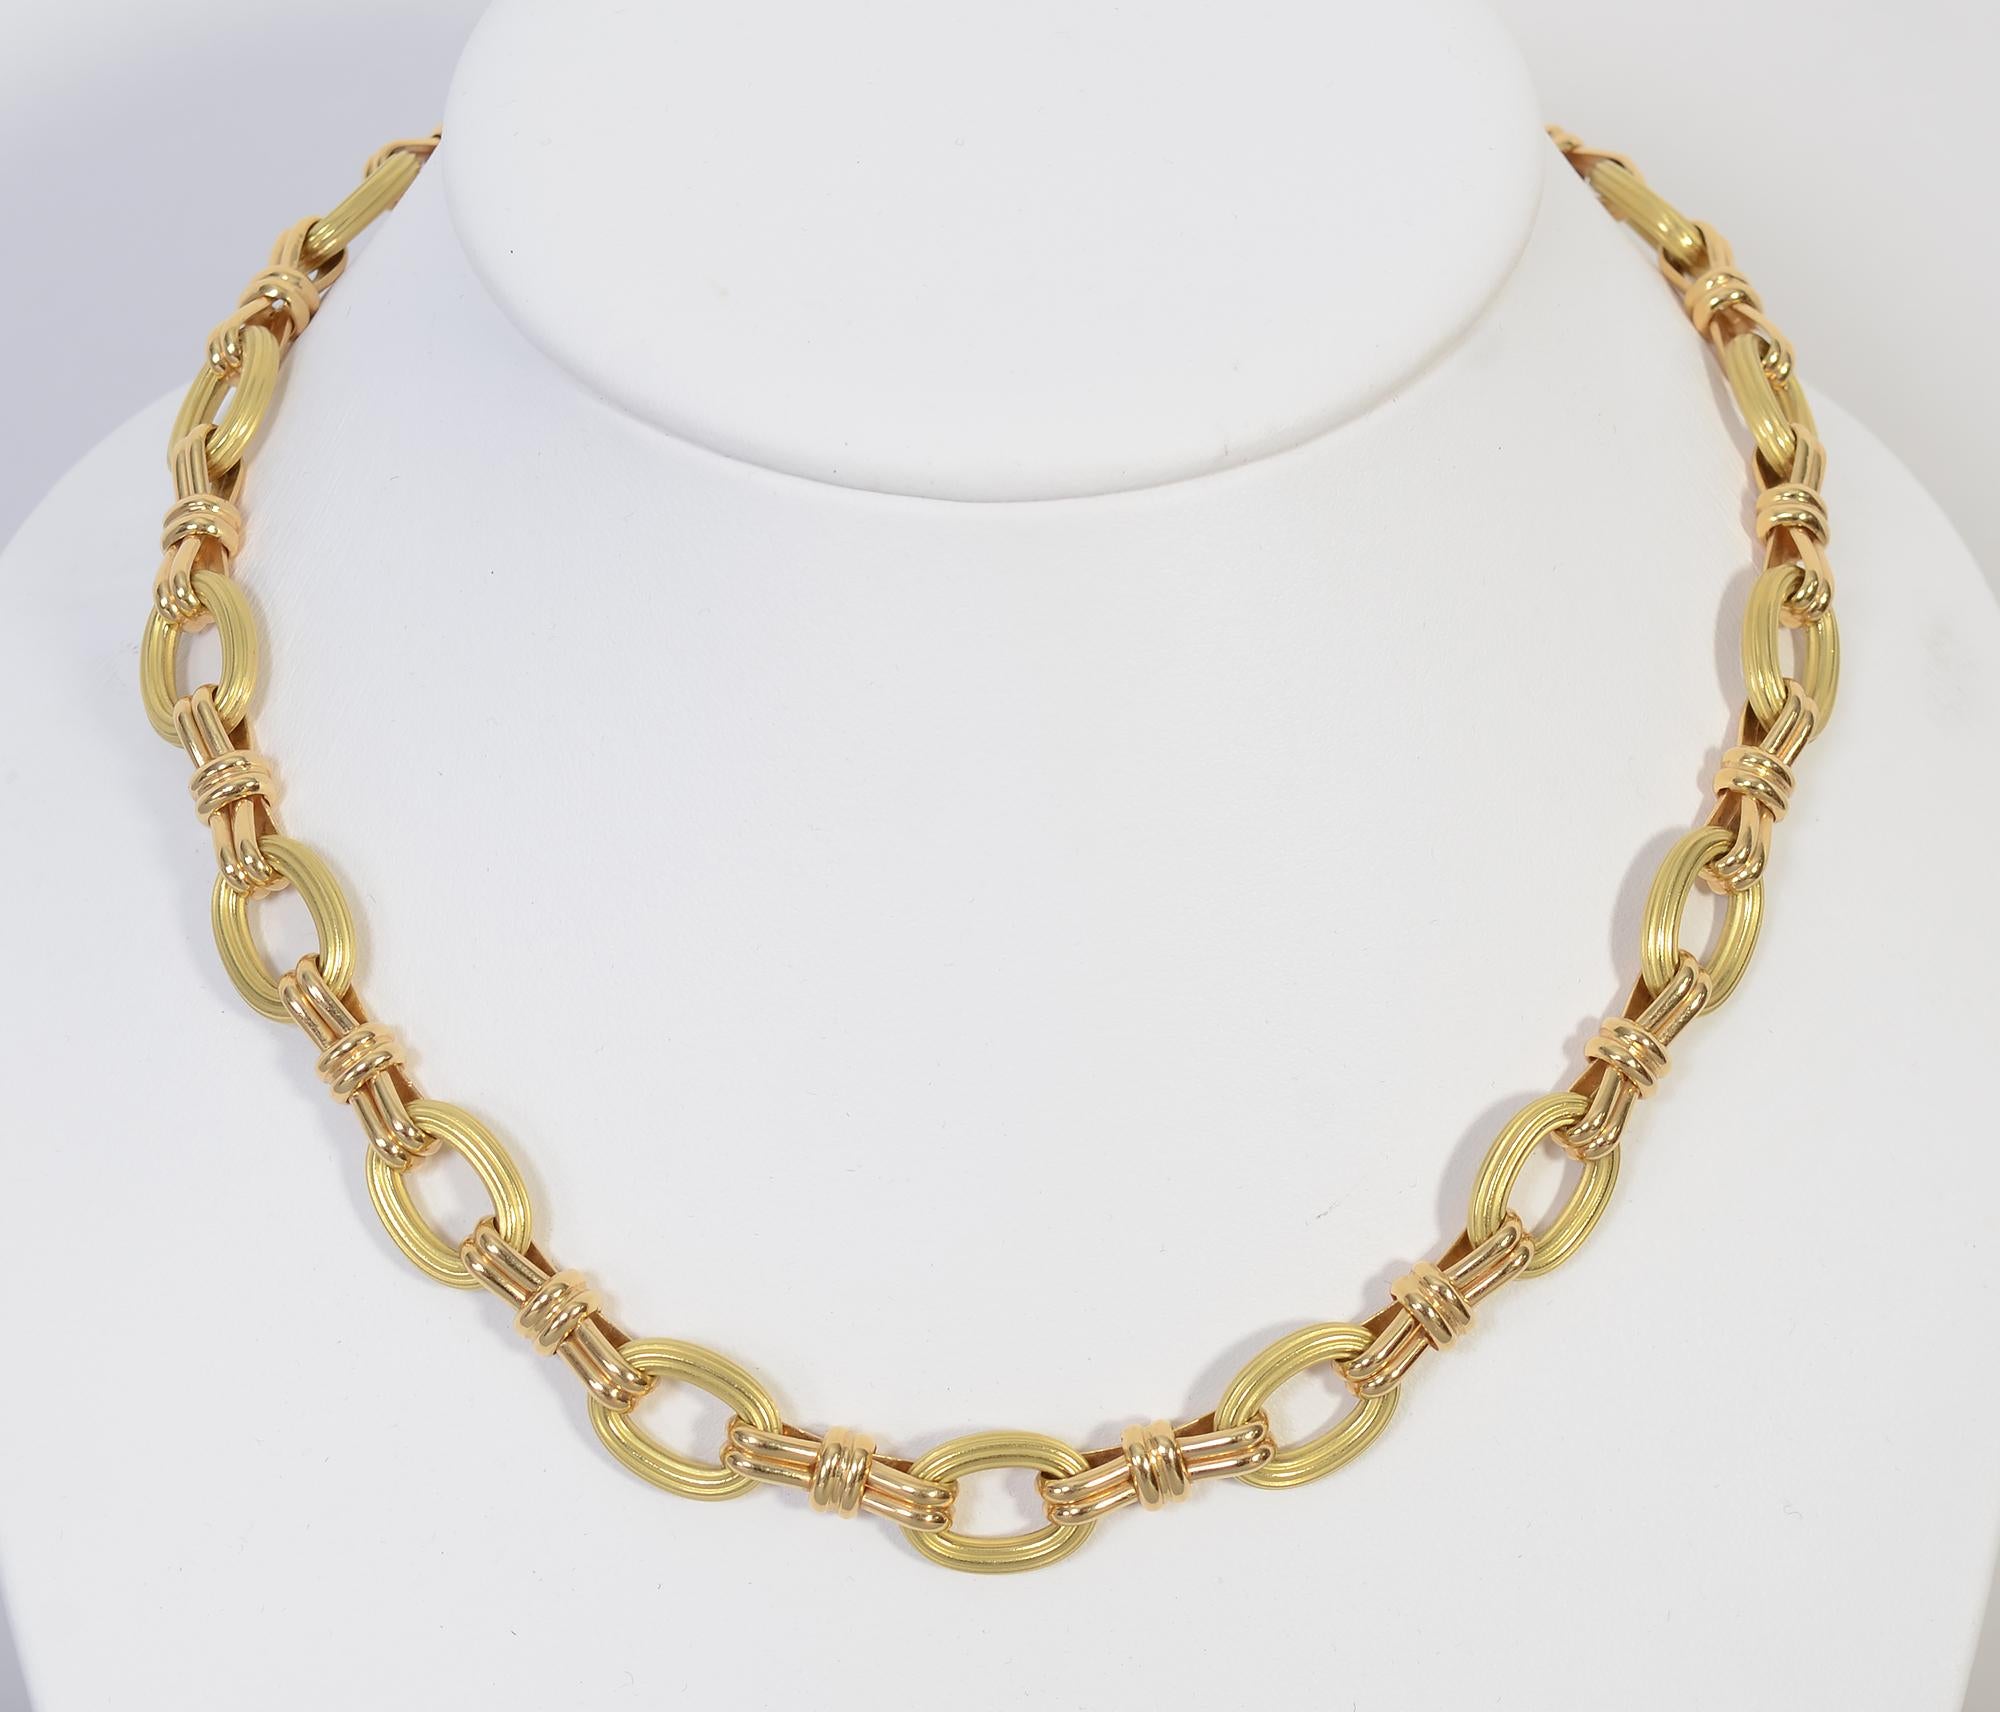 Beautiful and versatile gold links necklace by Chaumet. Ribbed oval links alternate with gloss double loop links. The necklace is 17 1/4 inches in length. The oval loops are 7/16